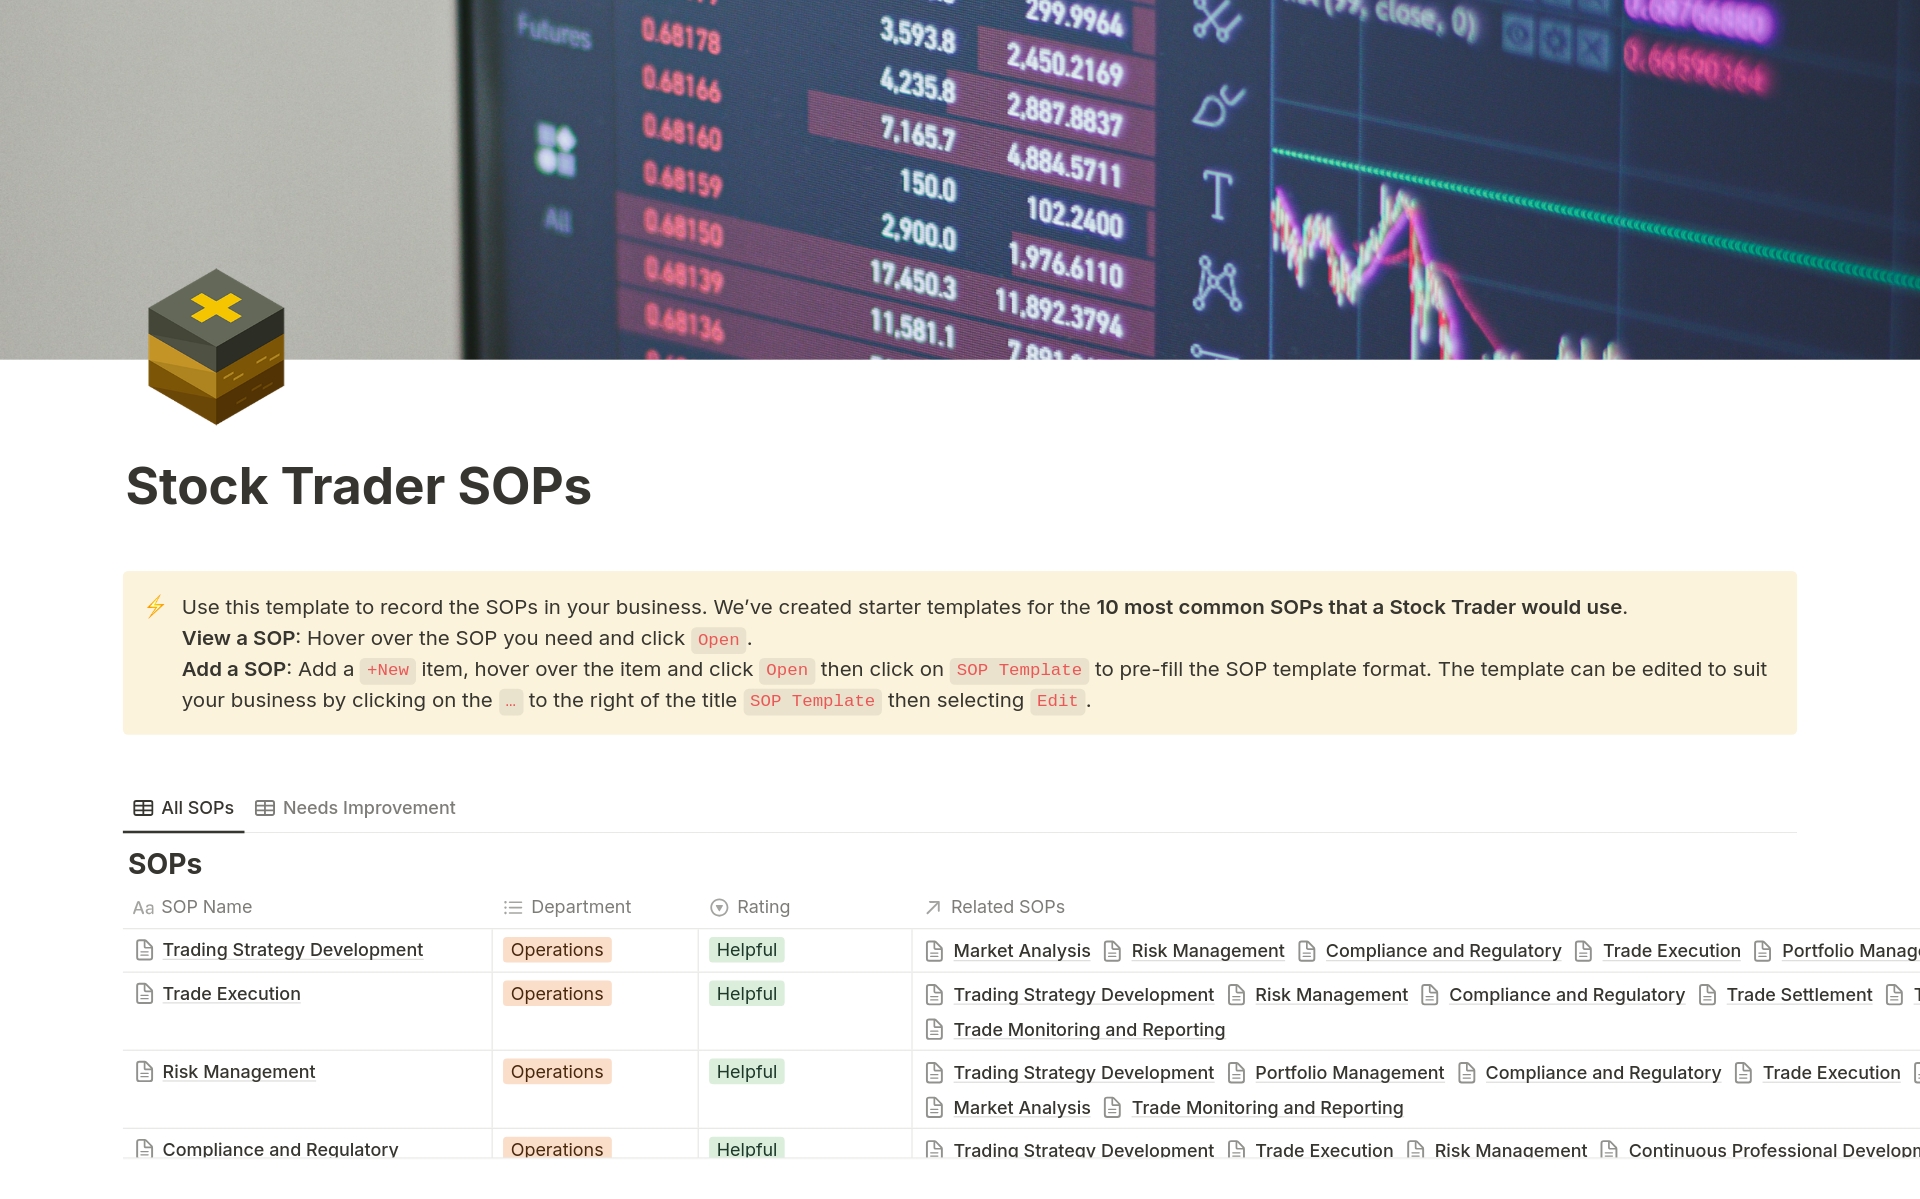 This template contains the standard operating procedures (SOPs) for stock traders. It covers areas such as strategy development, trade execution, risk management, and compliance. Includes 20+ pages of best practice SOPs to save you 10+ hours of research.